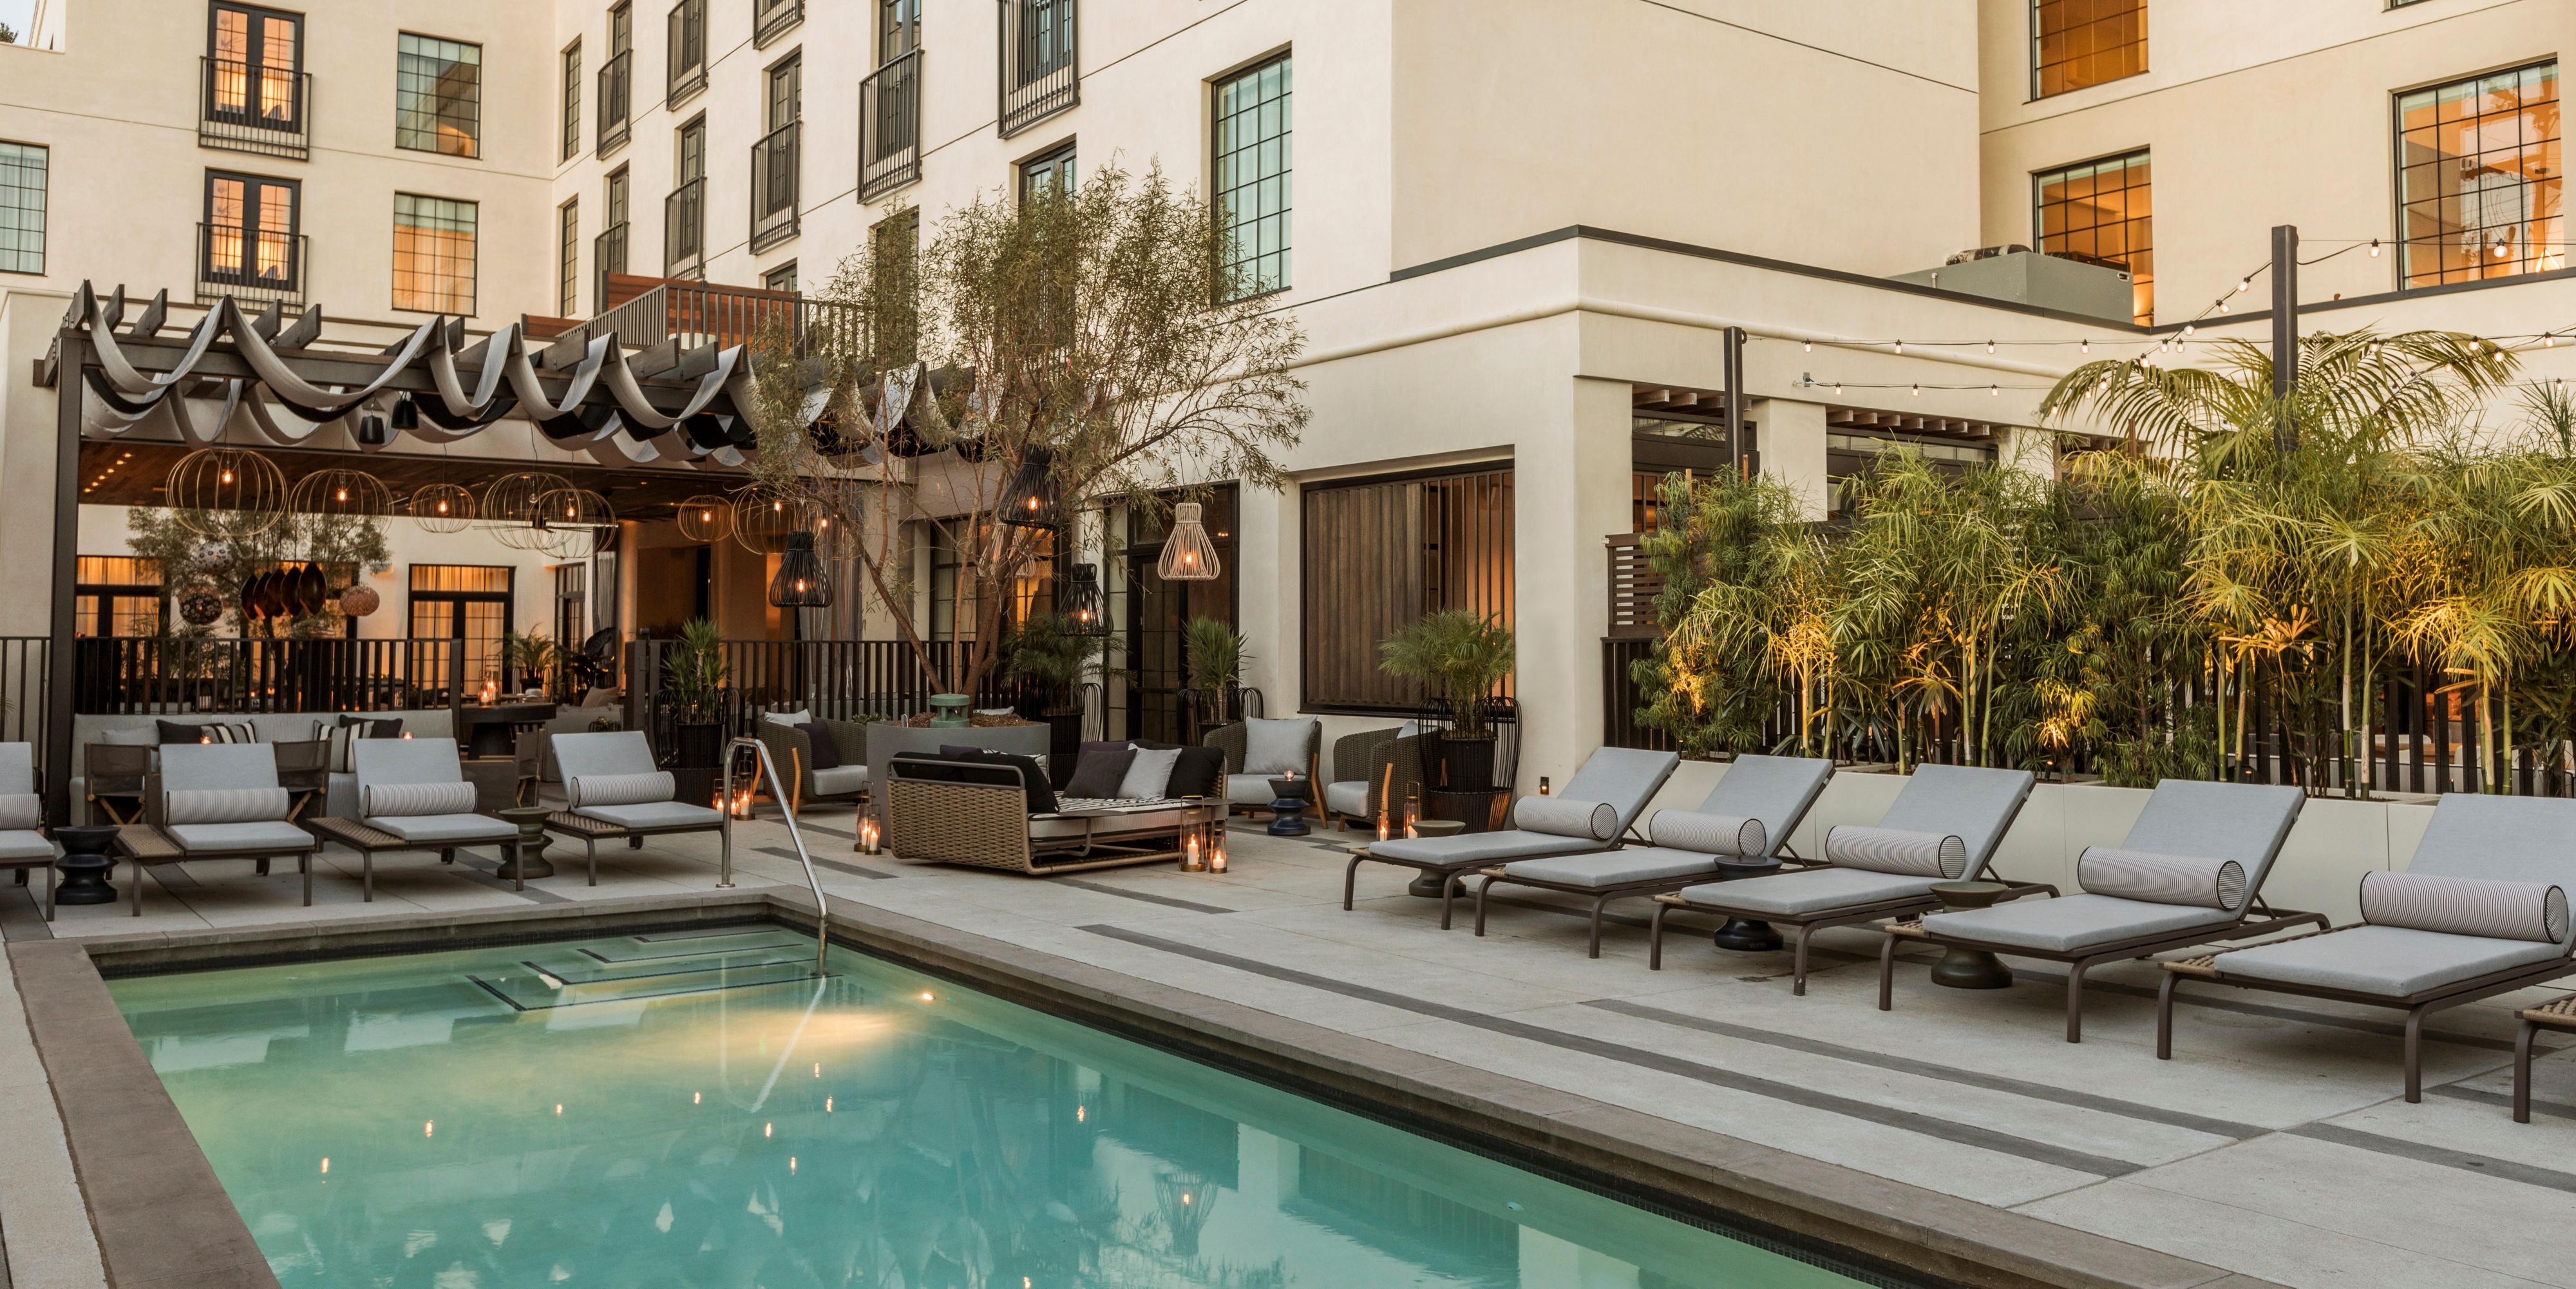 The artistry of Kimpton La Peer Hotel extends to our open-air courtyard pool. Olive trees offer shade by day, the soft glow of hanging lanterns by night. A hand-sculptured wall and comfortable lounge chairs add to the tranquil scene.